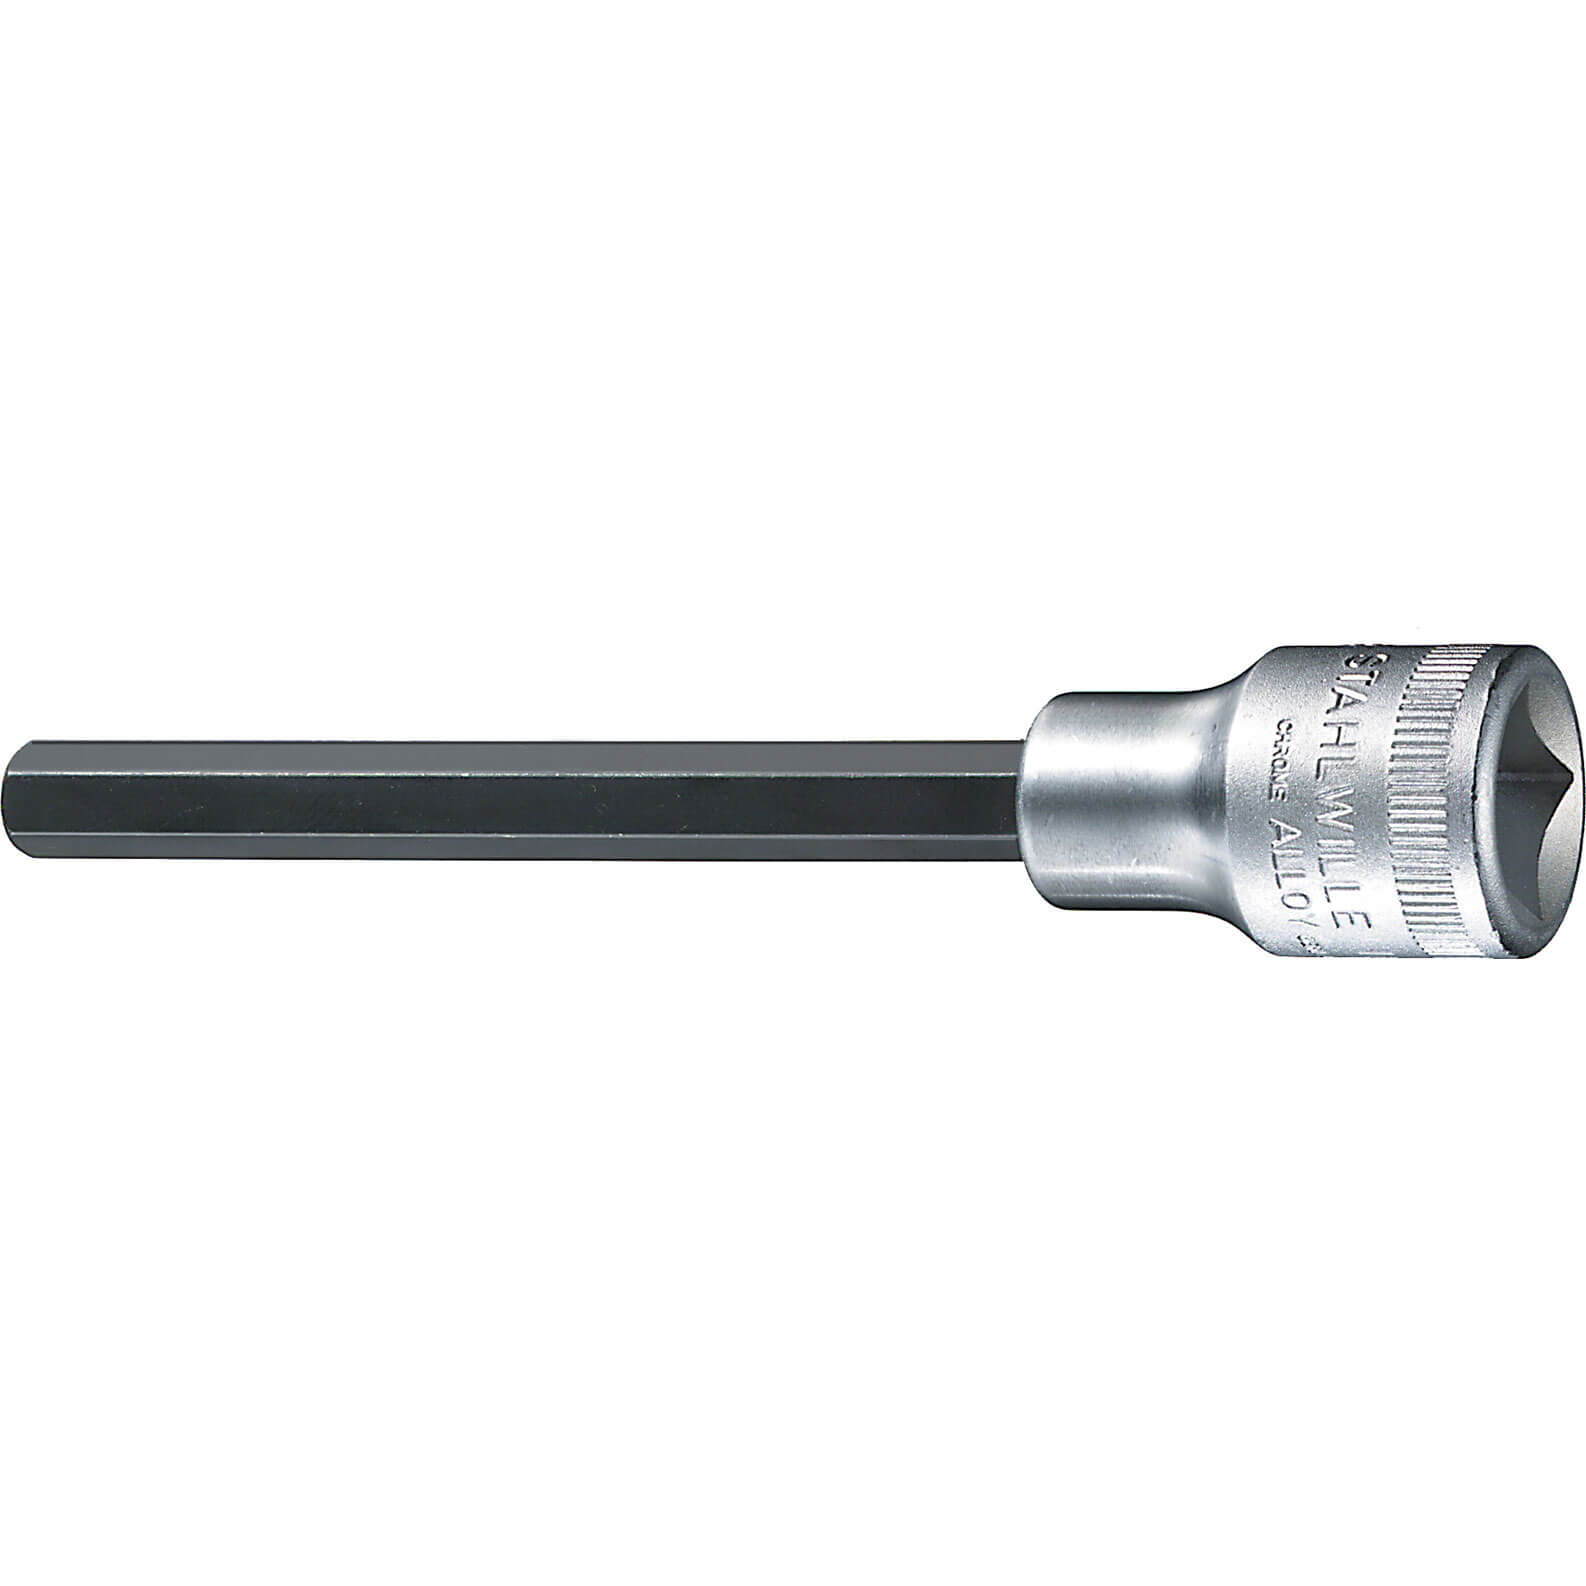 Image of Stahlwille 1/2" Drive Extra Long Hexagon Socket Bit 1/2" 6mm